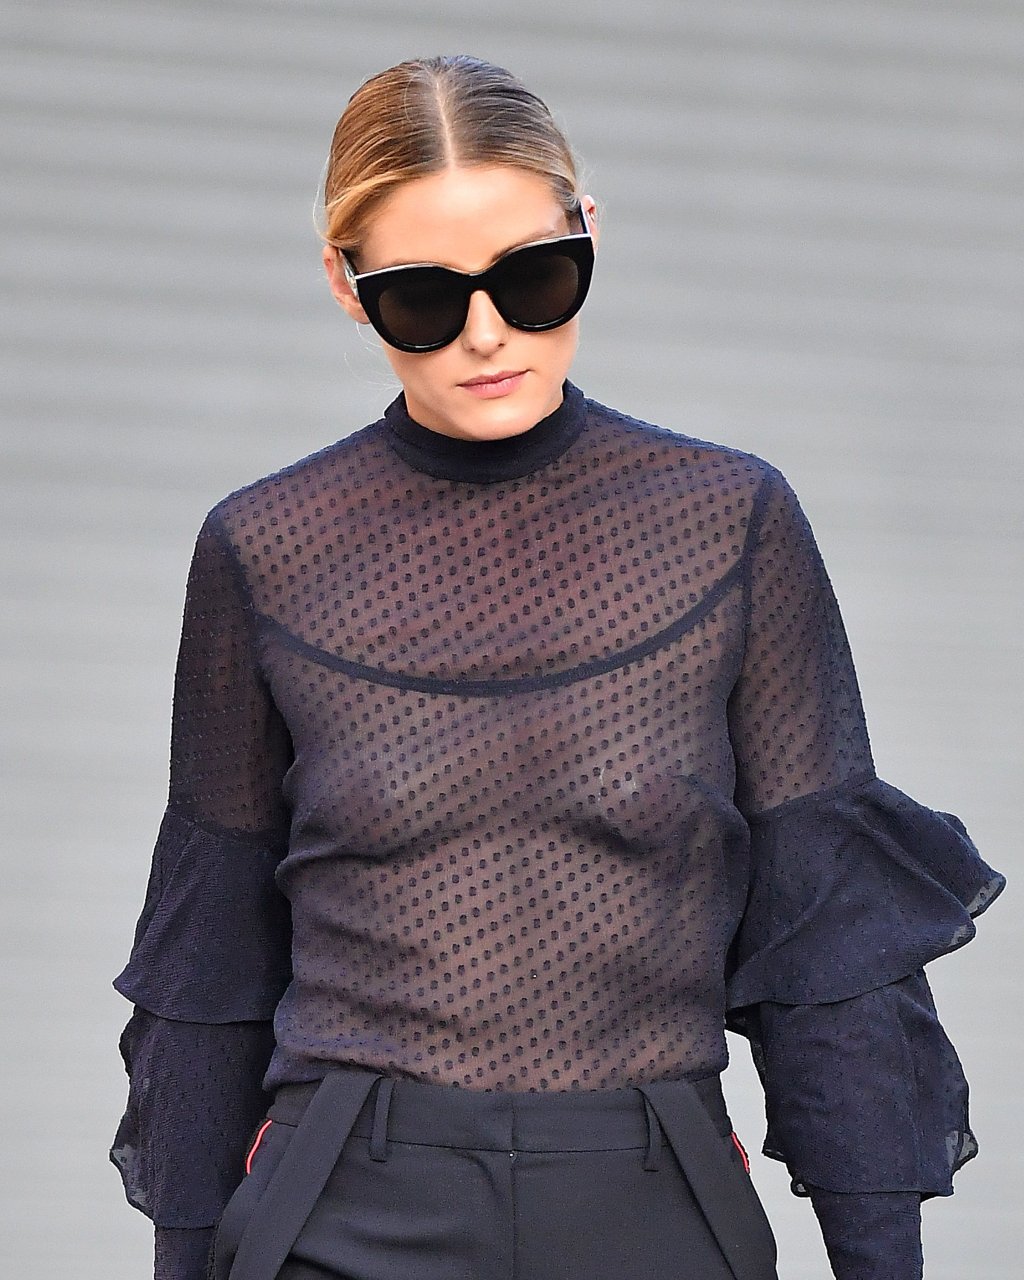 Olivia Palermo wears a black sheer top with pasties while exiting her apart...